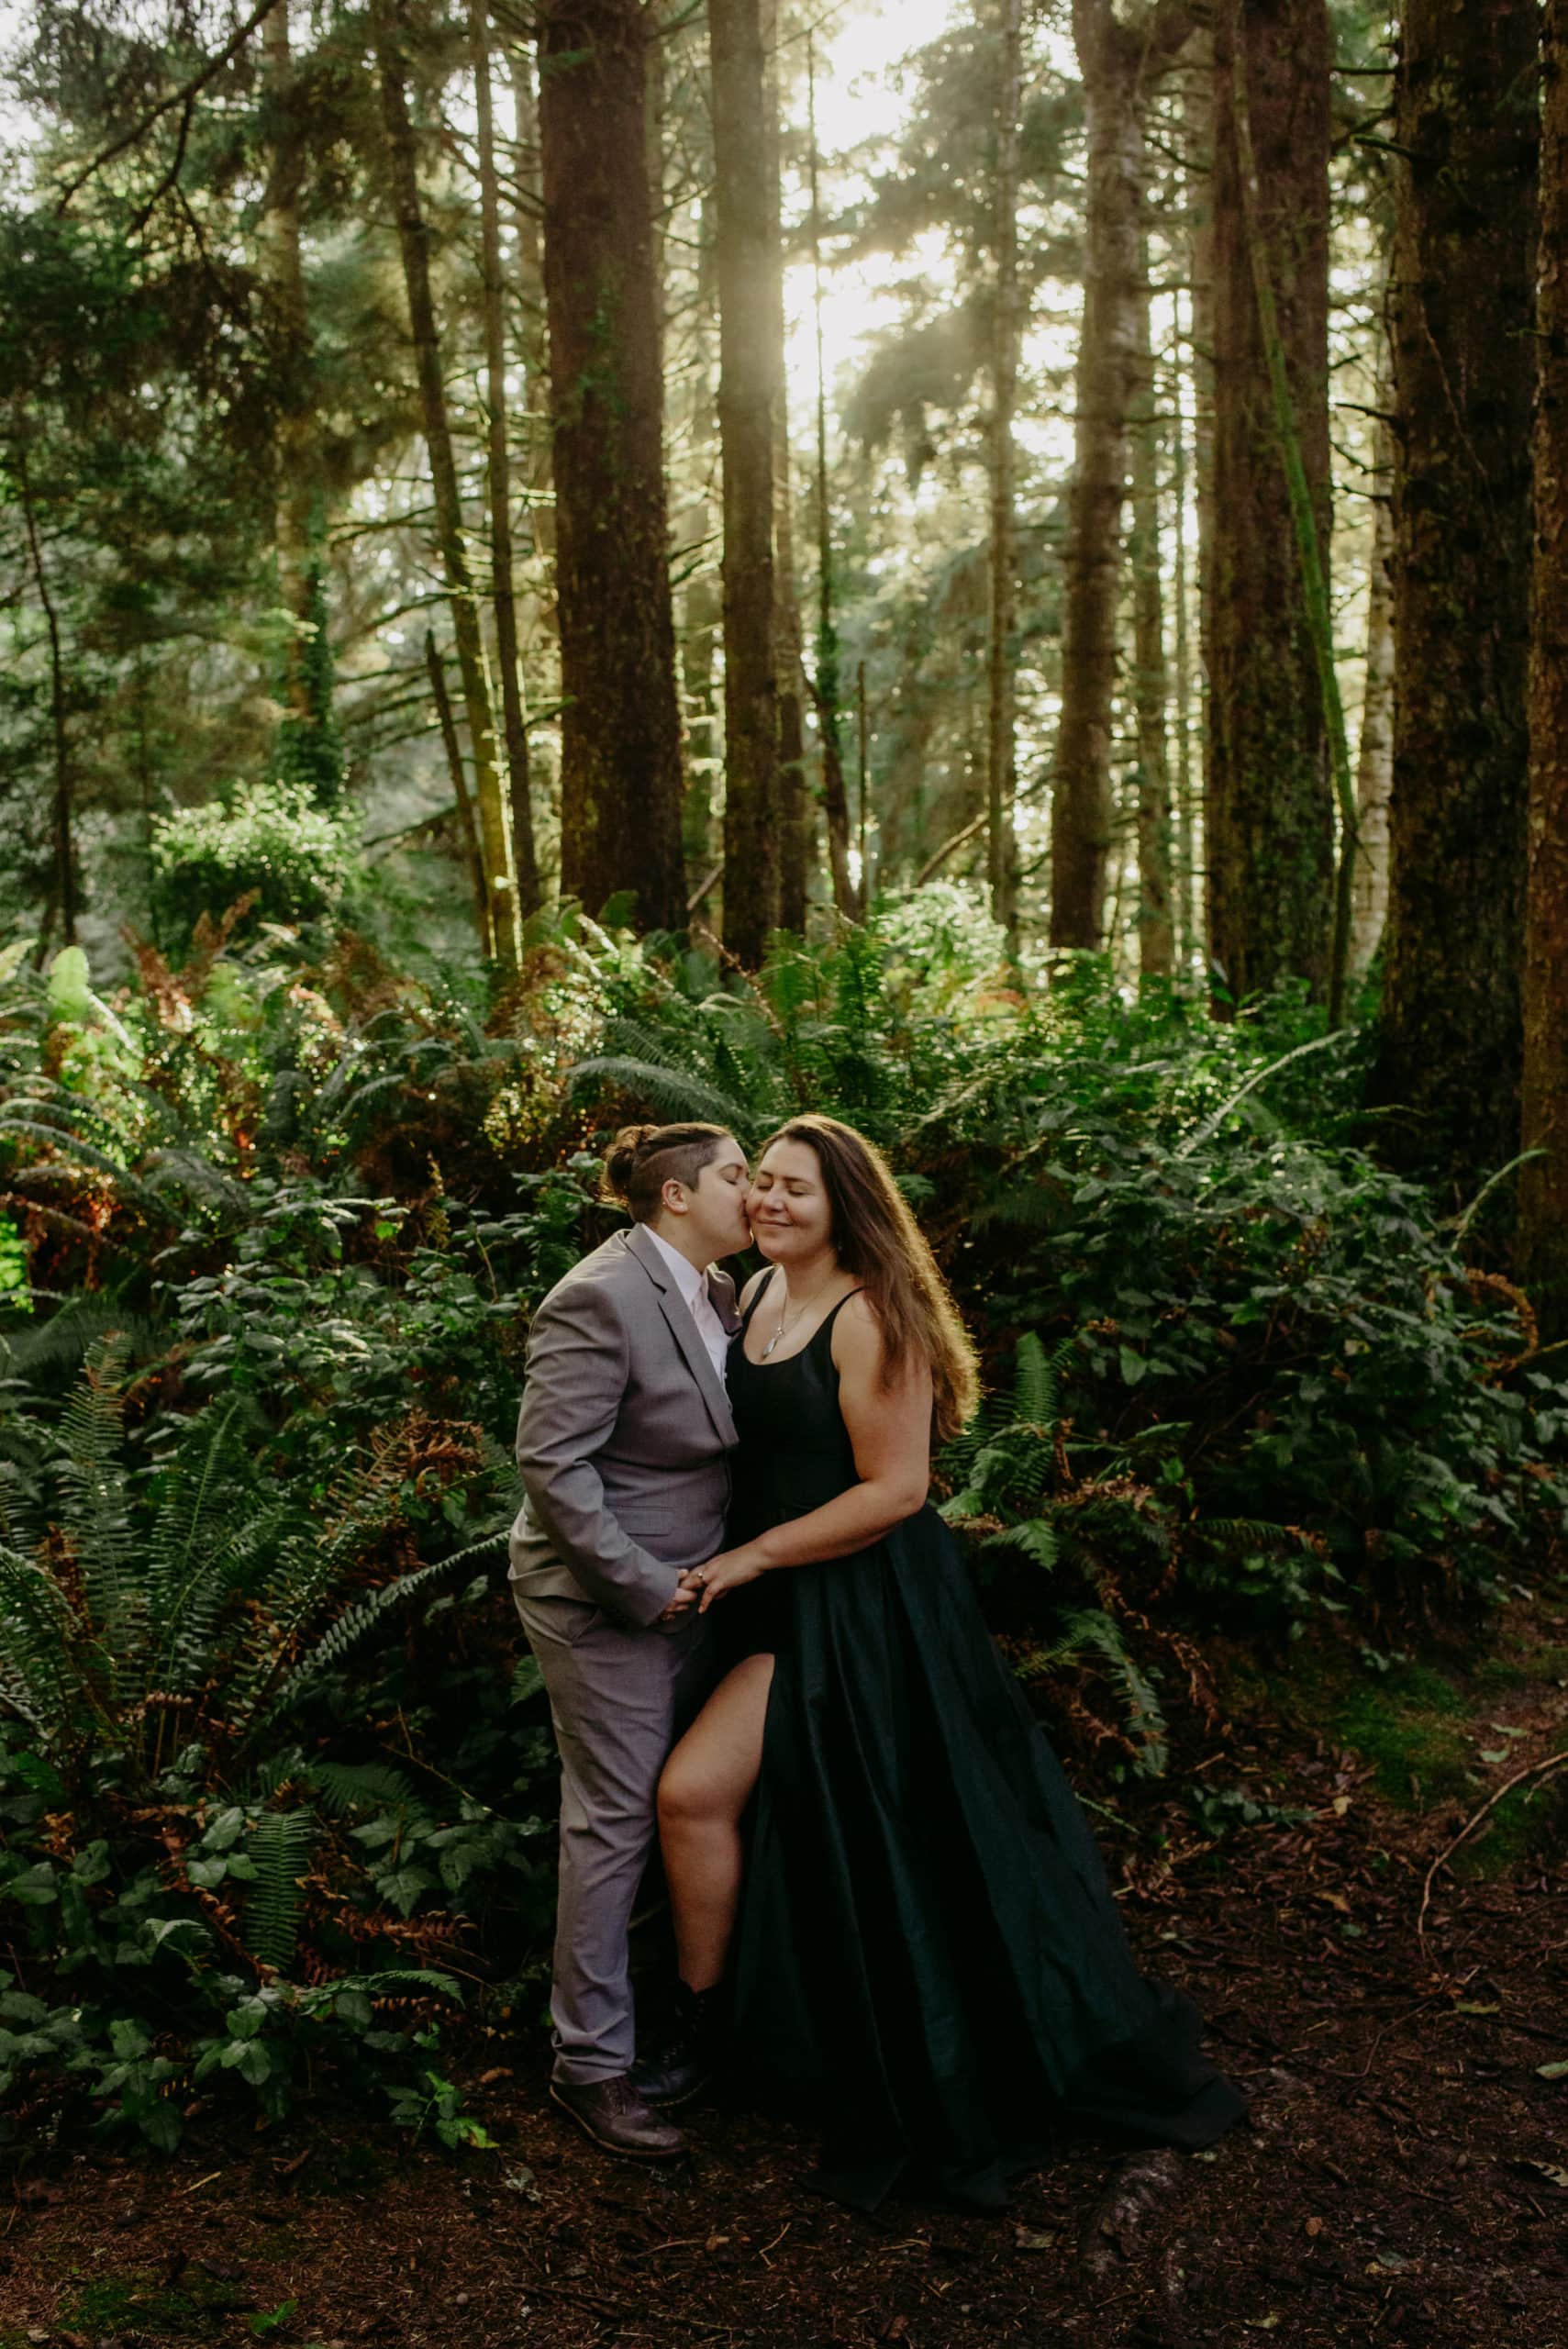 Two brides embrace in the Northern California forest